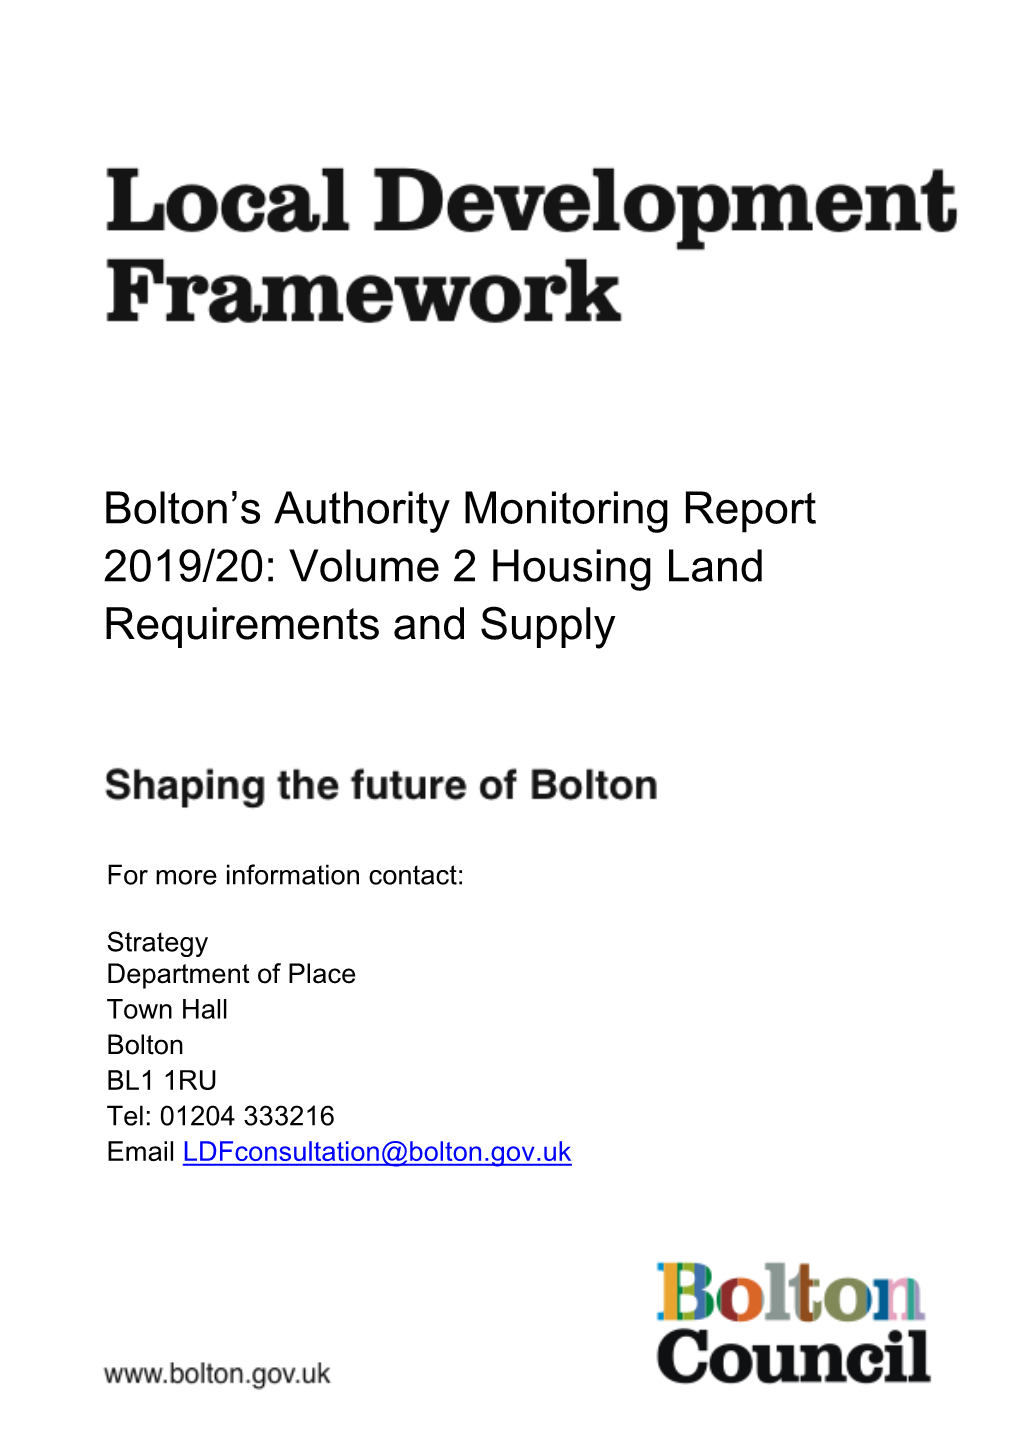 2019/20 Housing Land Requirements and Supply